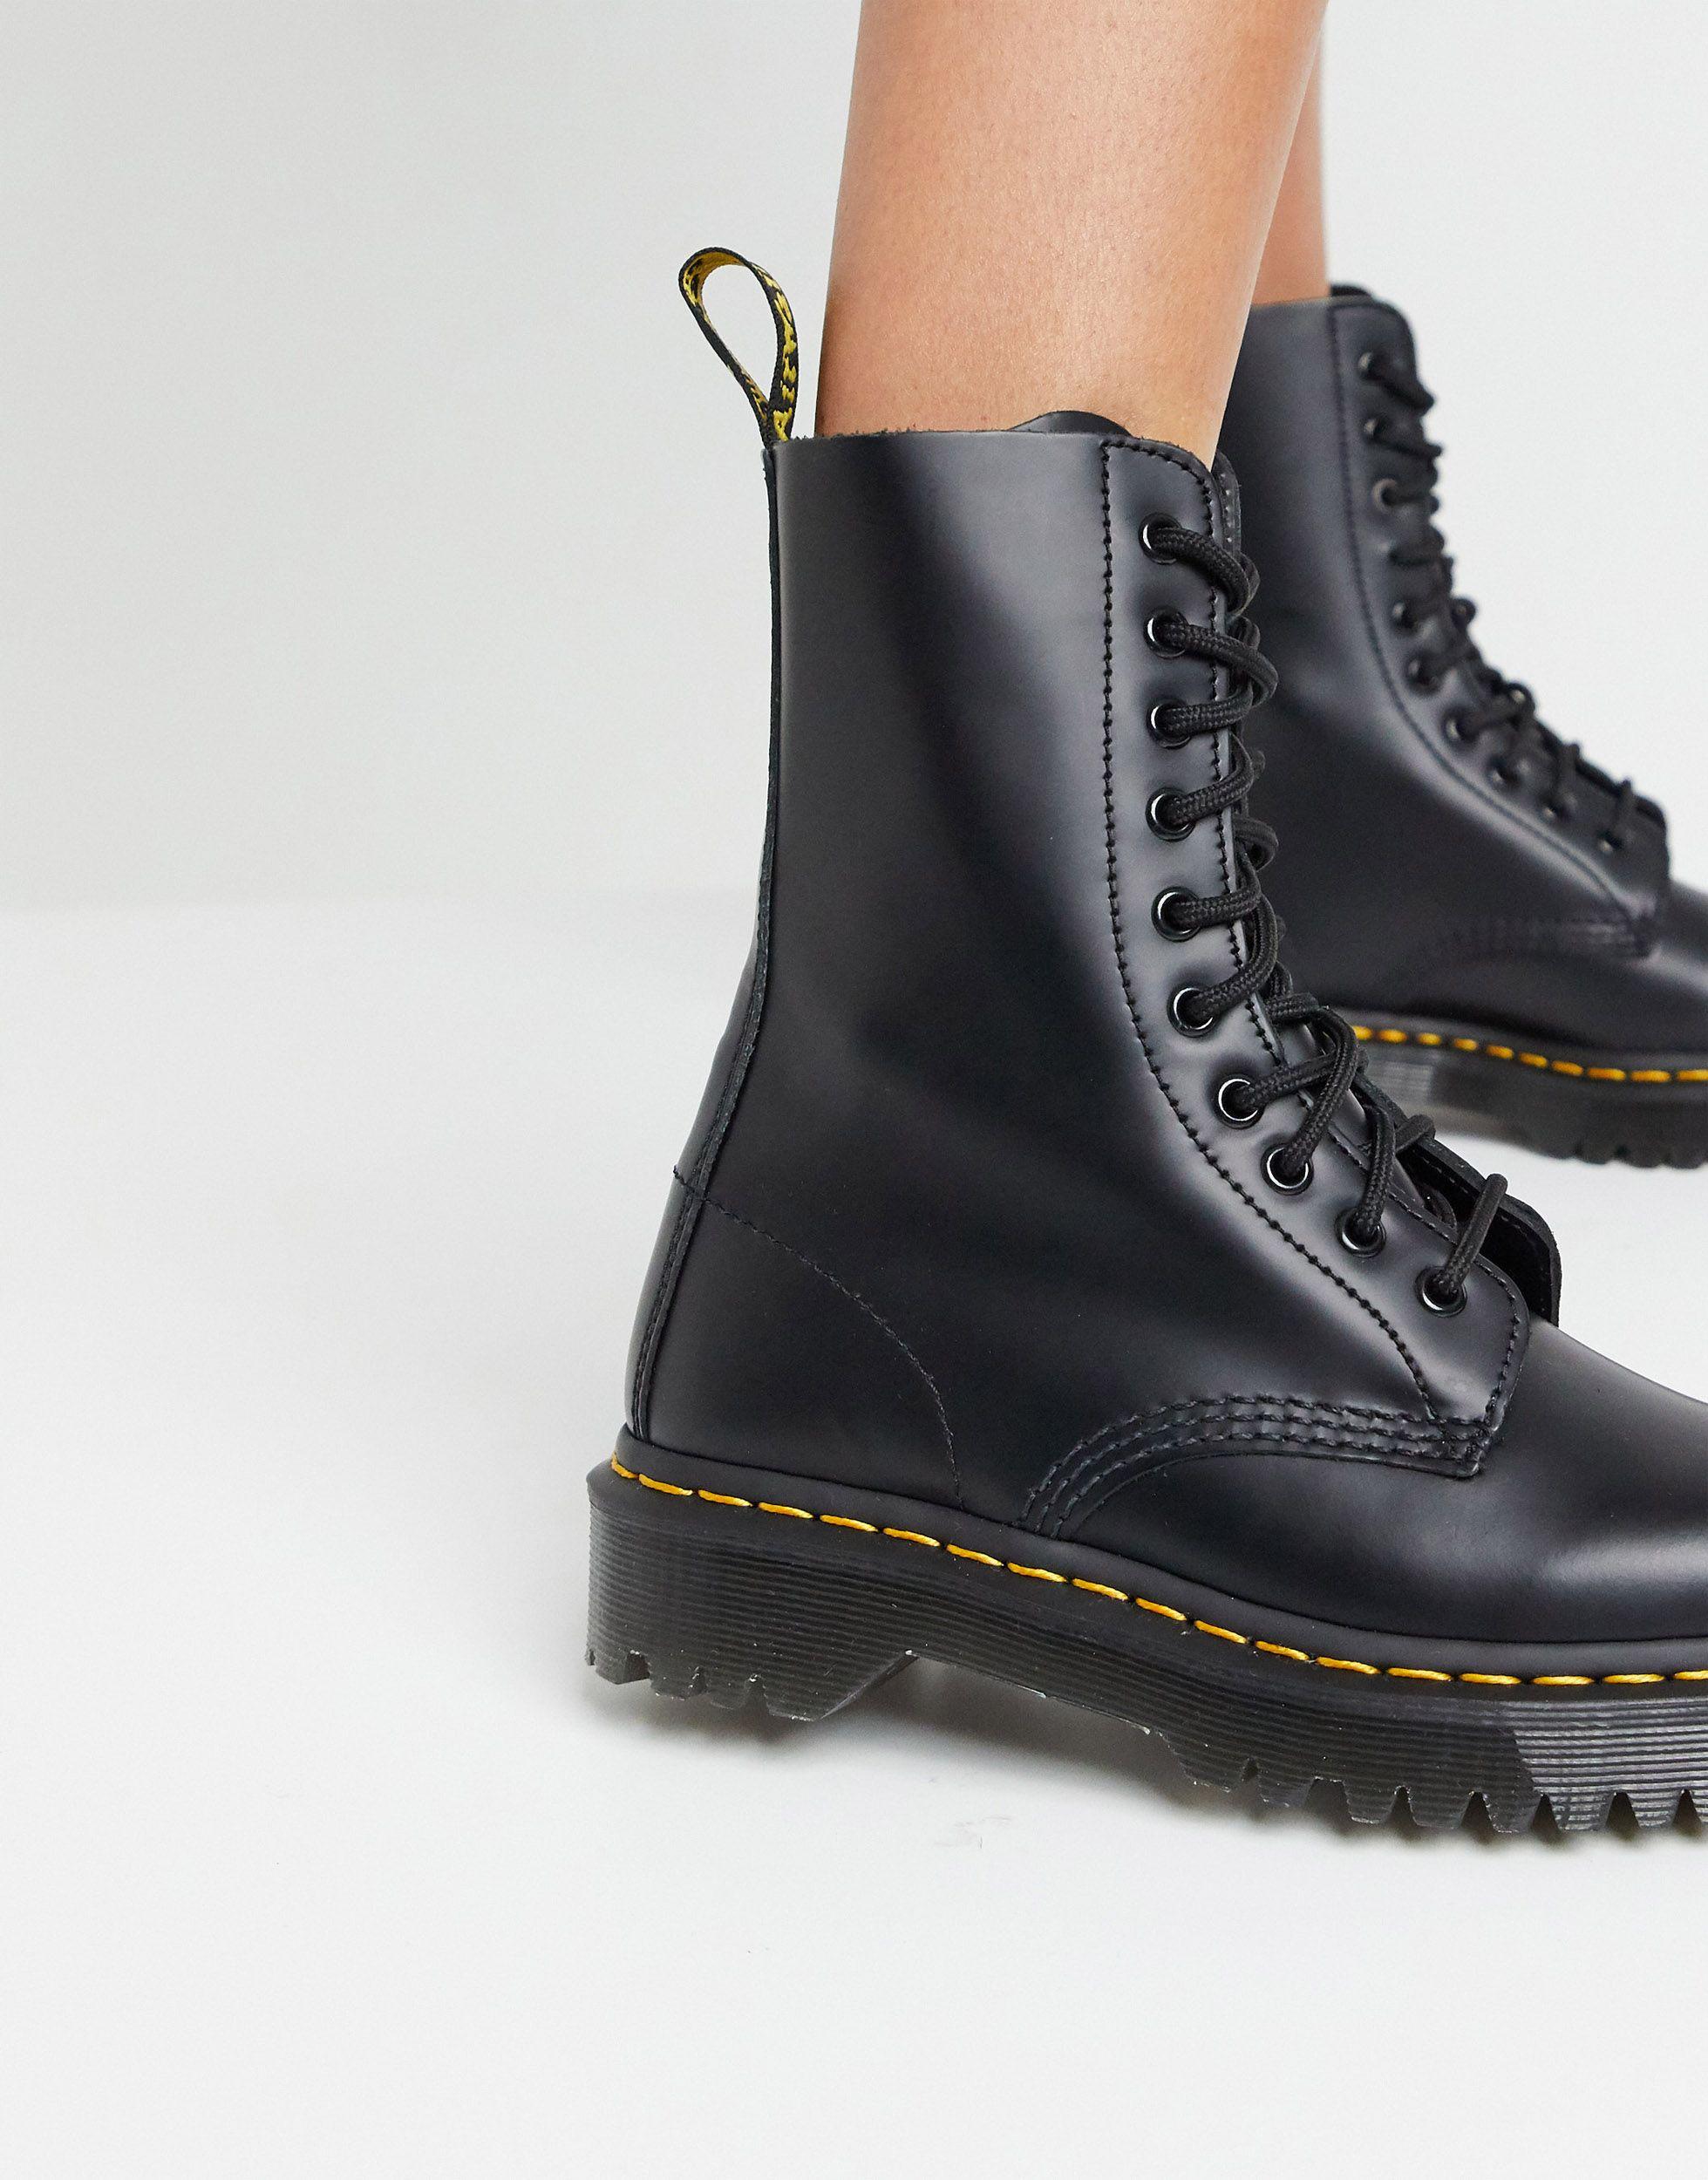 Dr. Martens Leather 1490 10 Eye Bex Boots in Black - Save 41% | Lyst UK